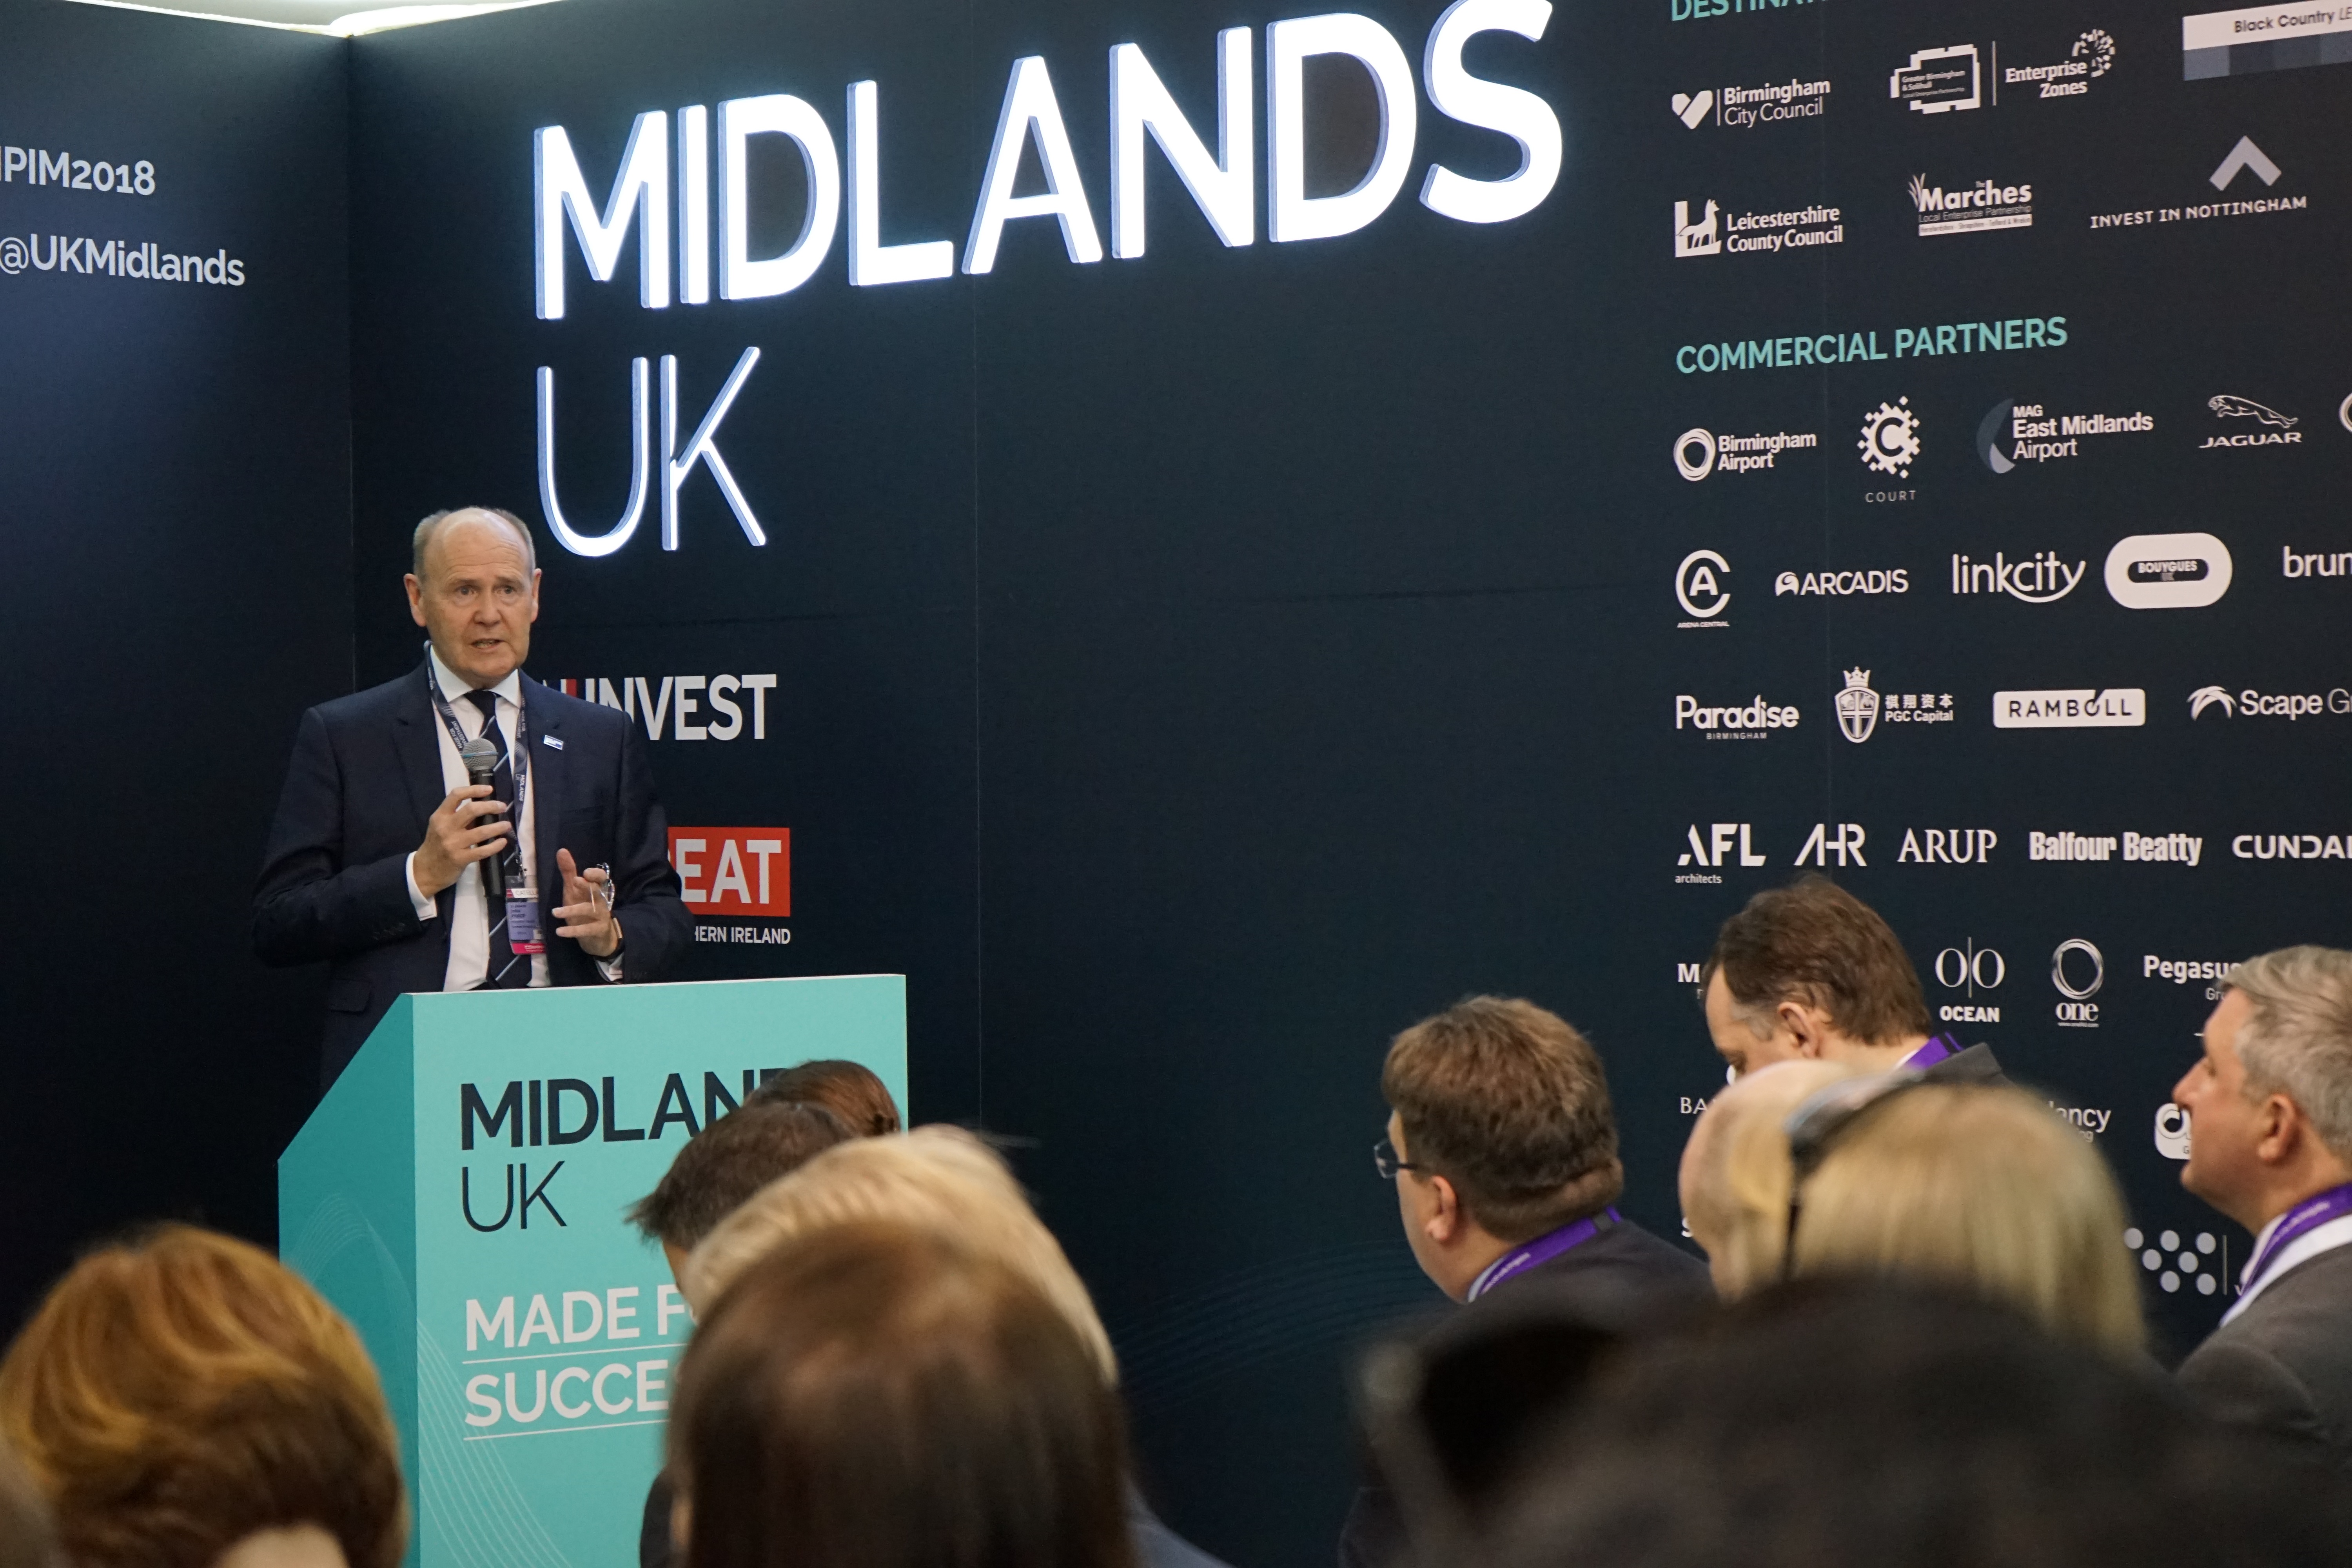 Sir John Peace, chair of the Midlands Engine speaking at MIPIM